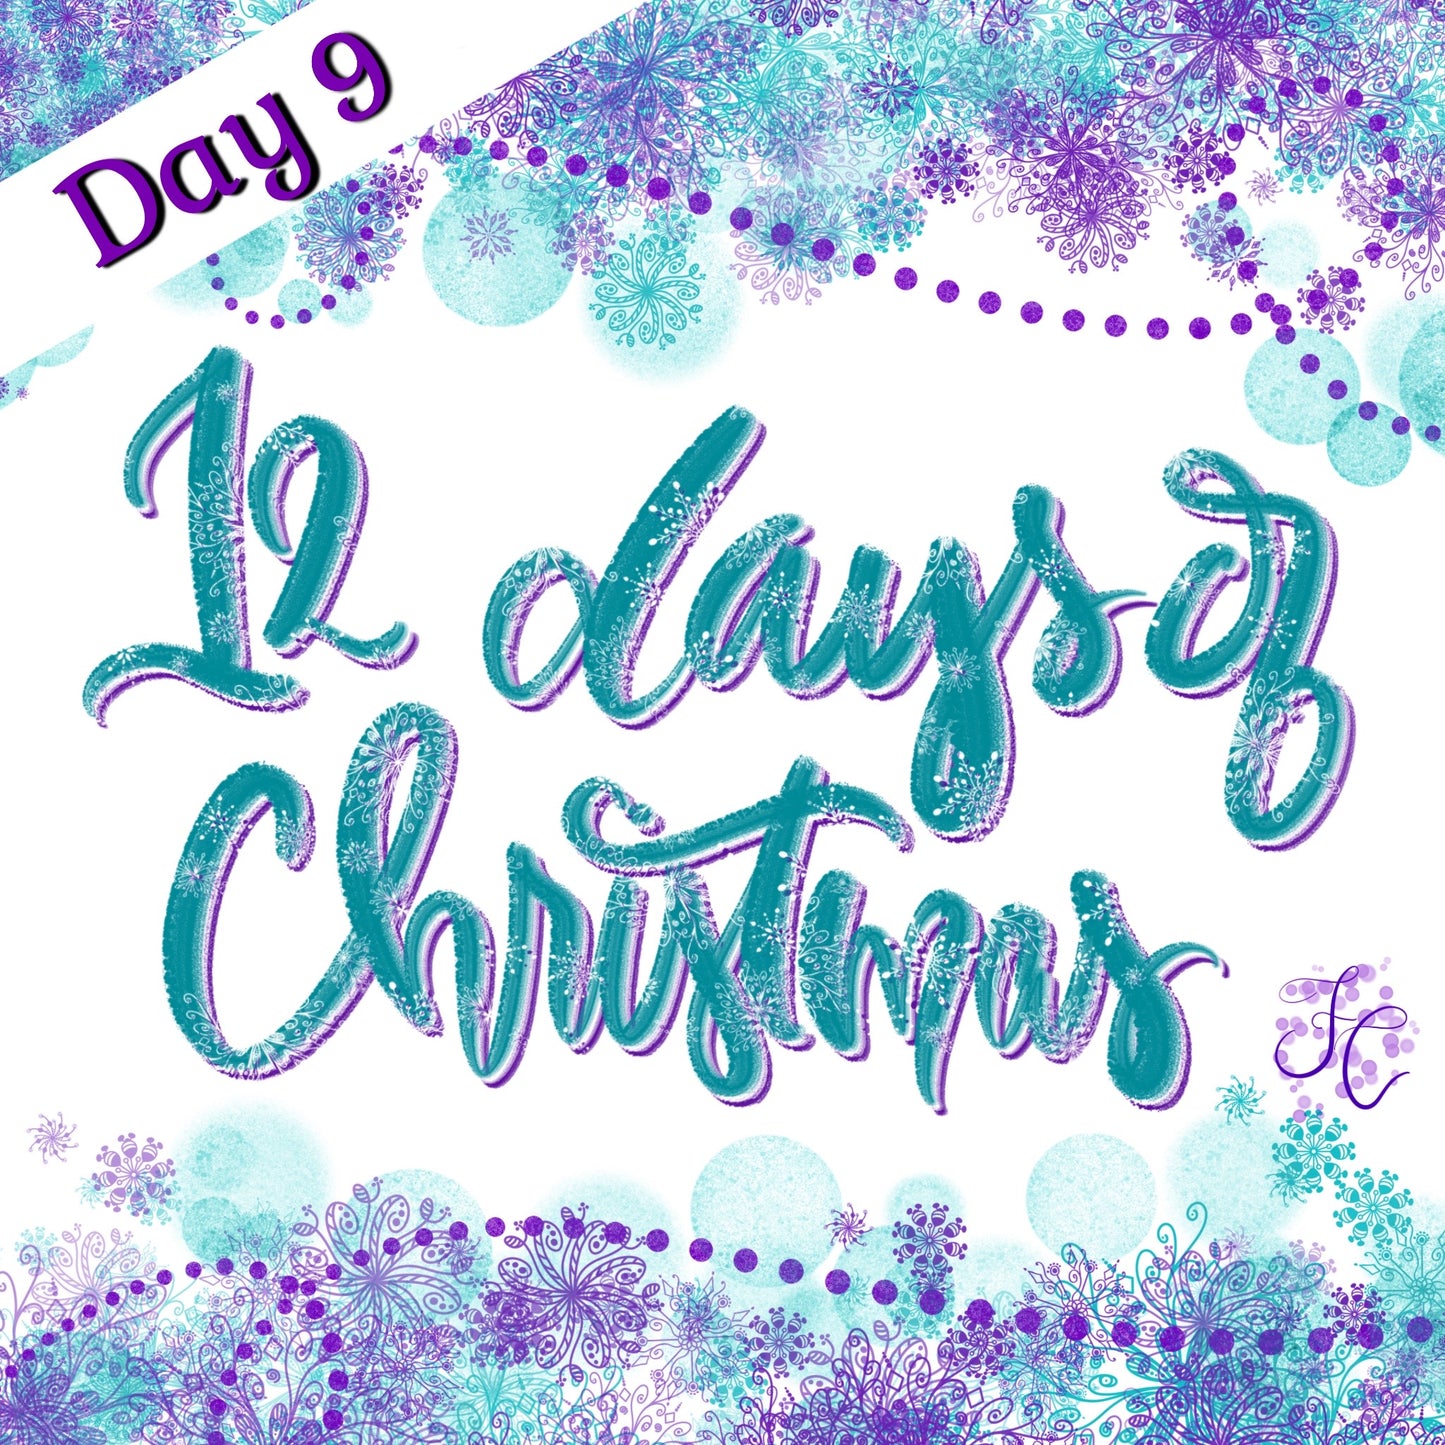 12 Days of Christmas Day 09~Evergreen~Handmade Shimmer watercolor paint-half pan